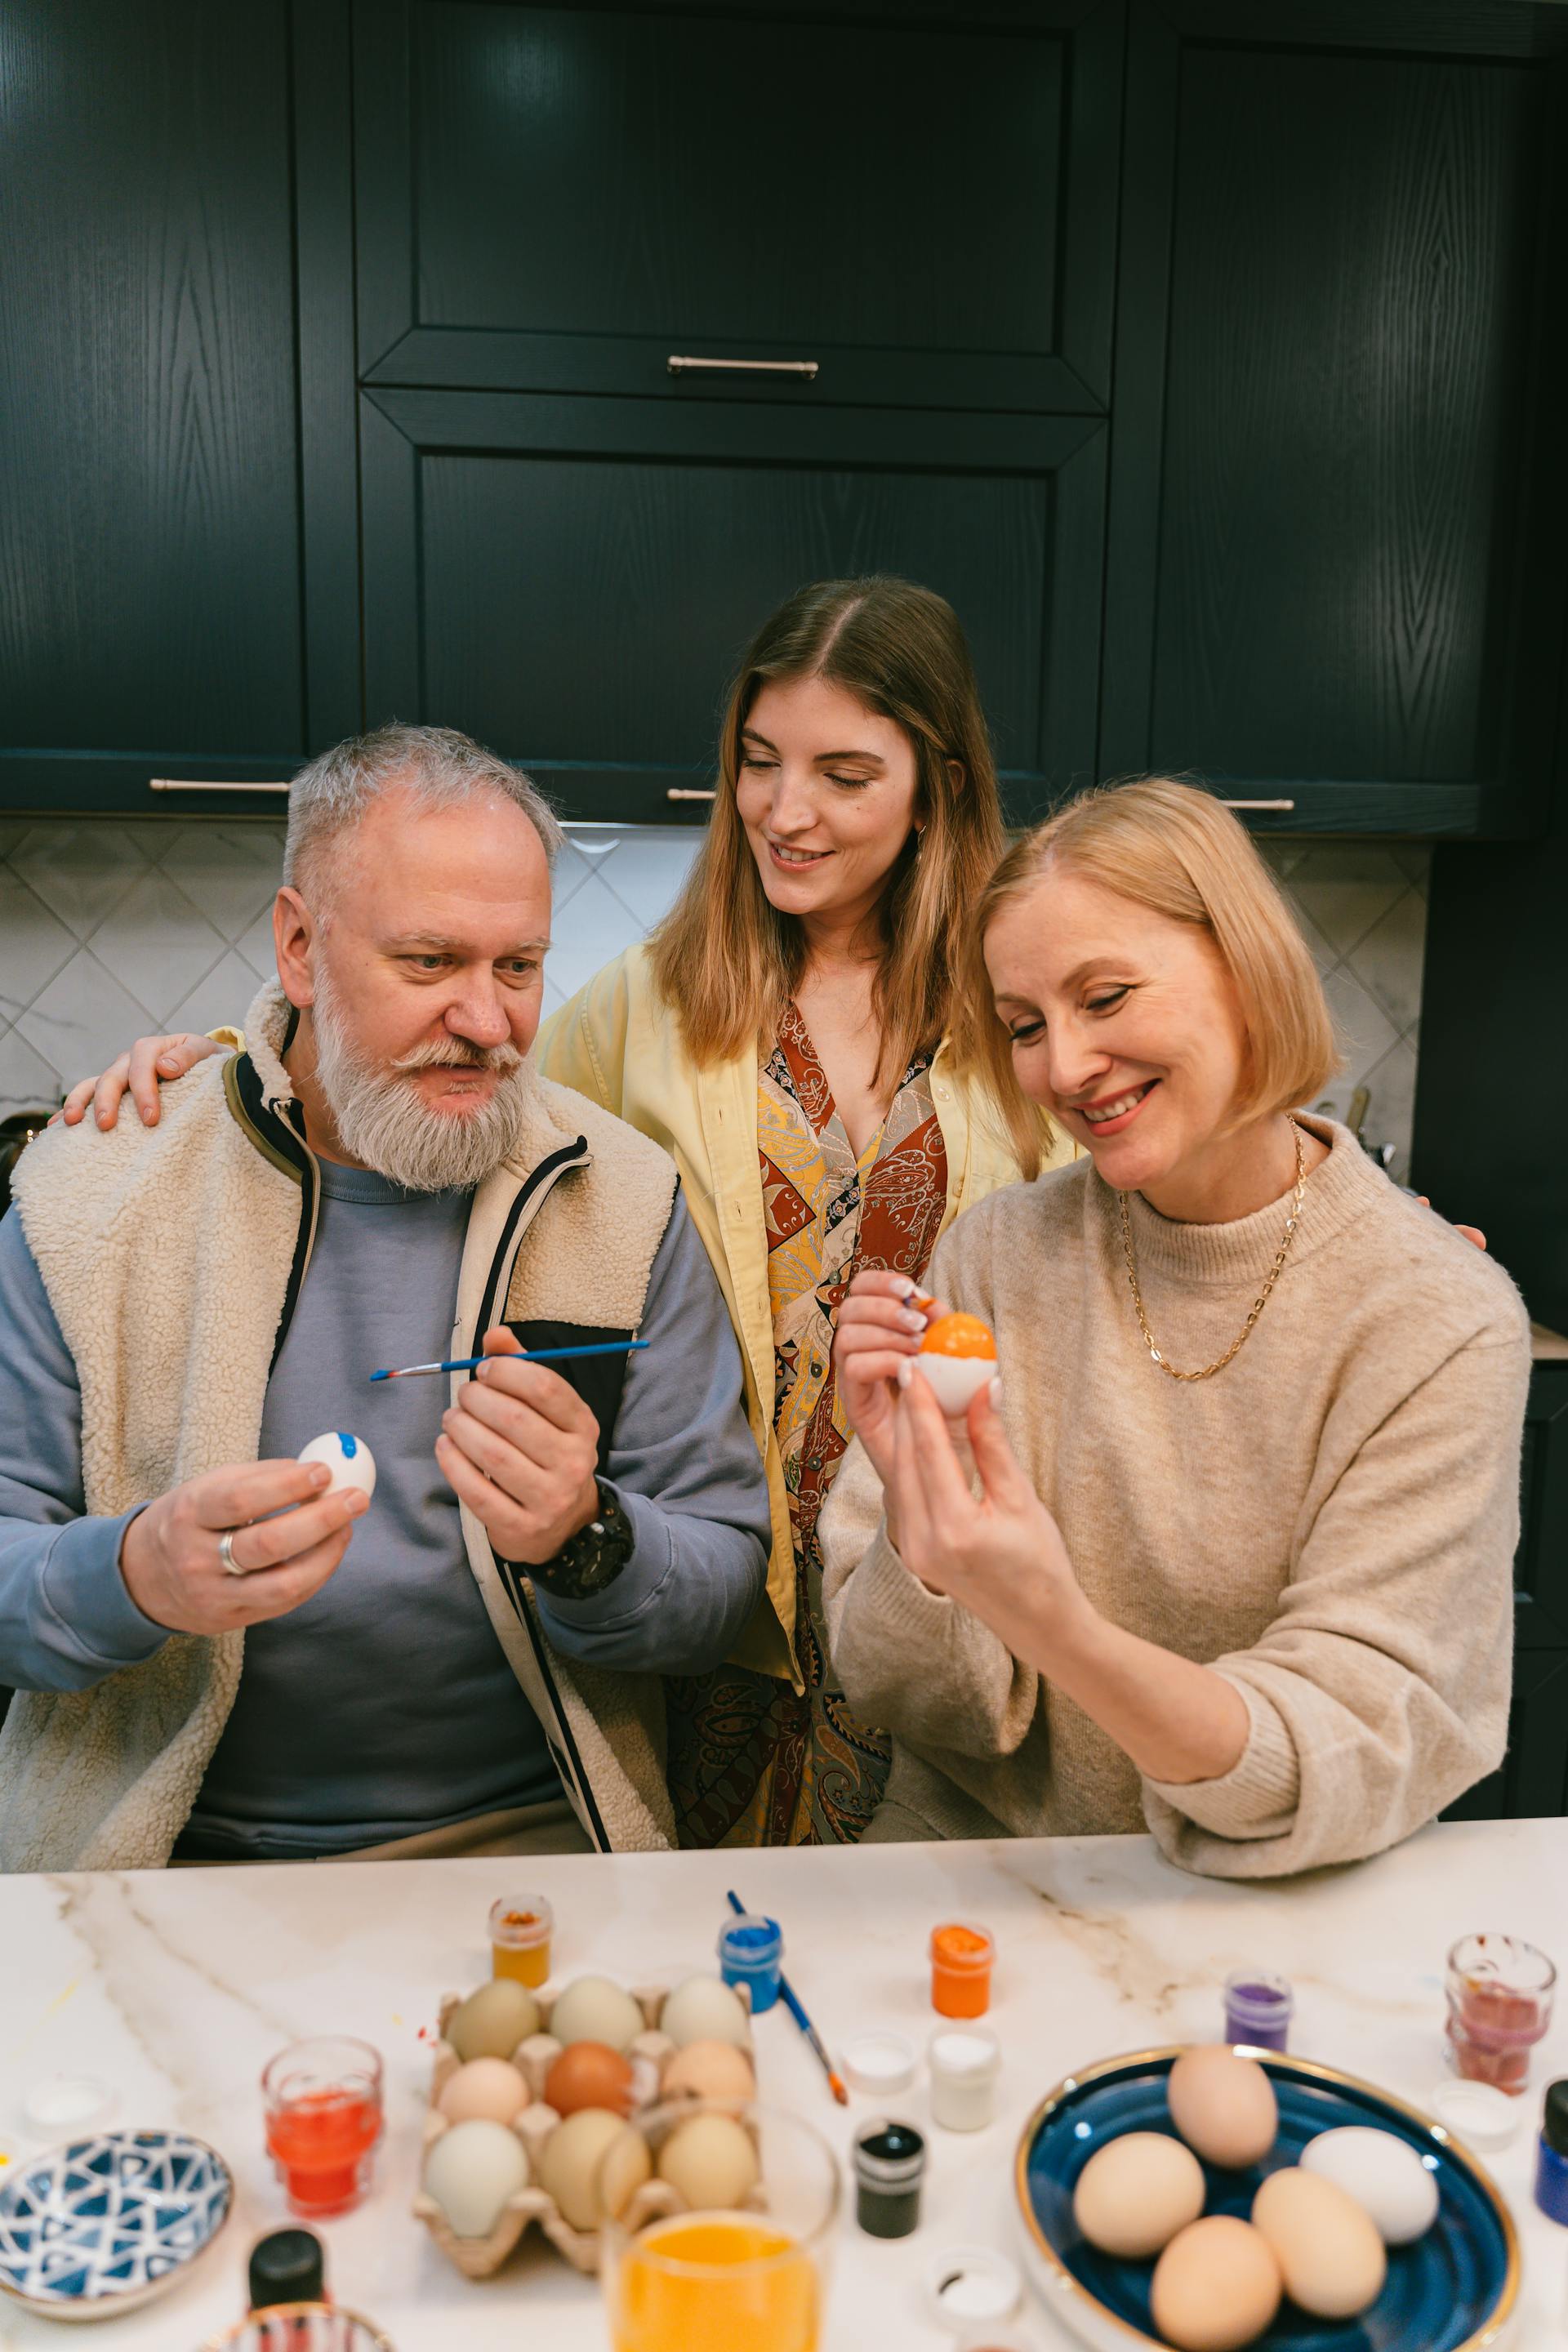 A woman watching her senior parents paint Easter eggs in the kitchen | Source: Pexels